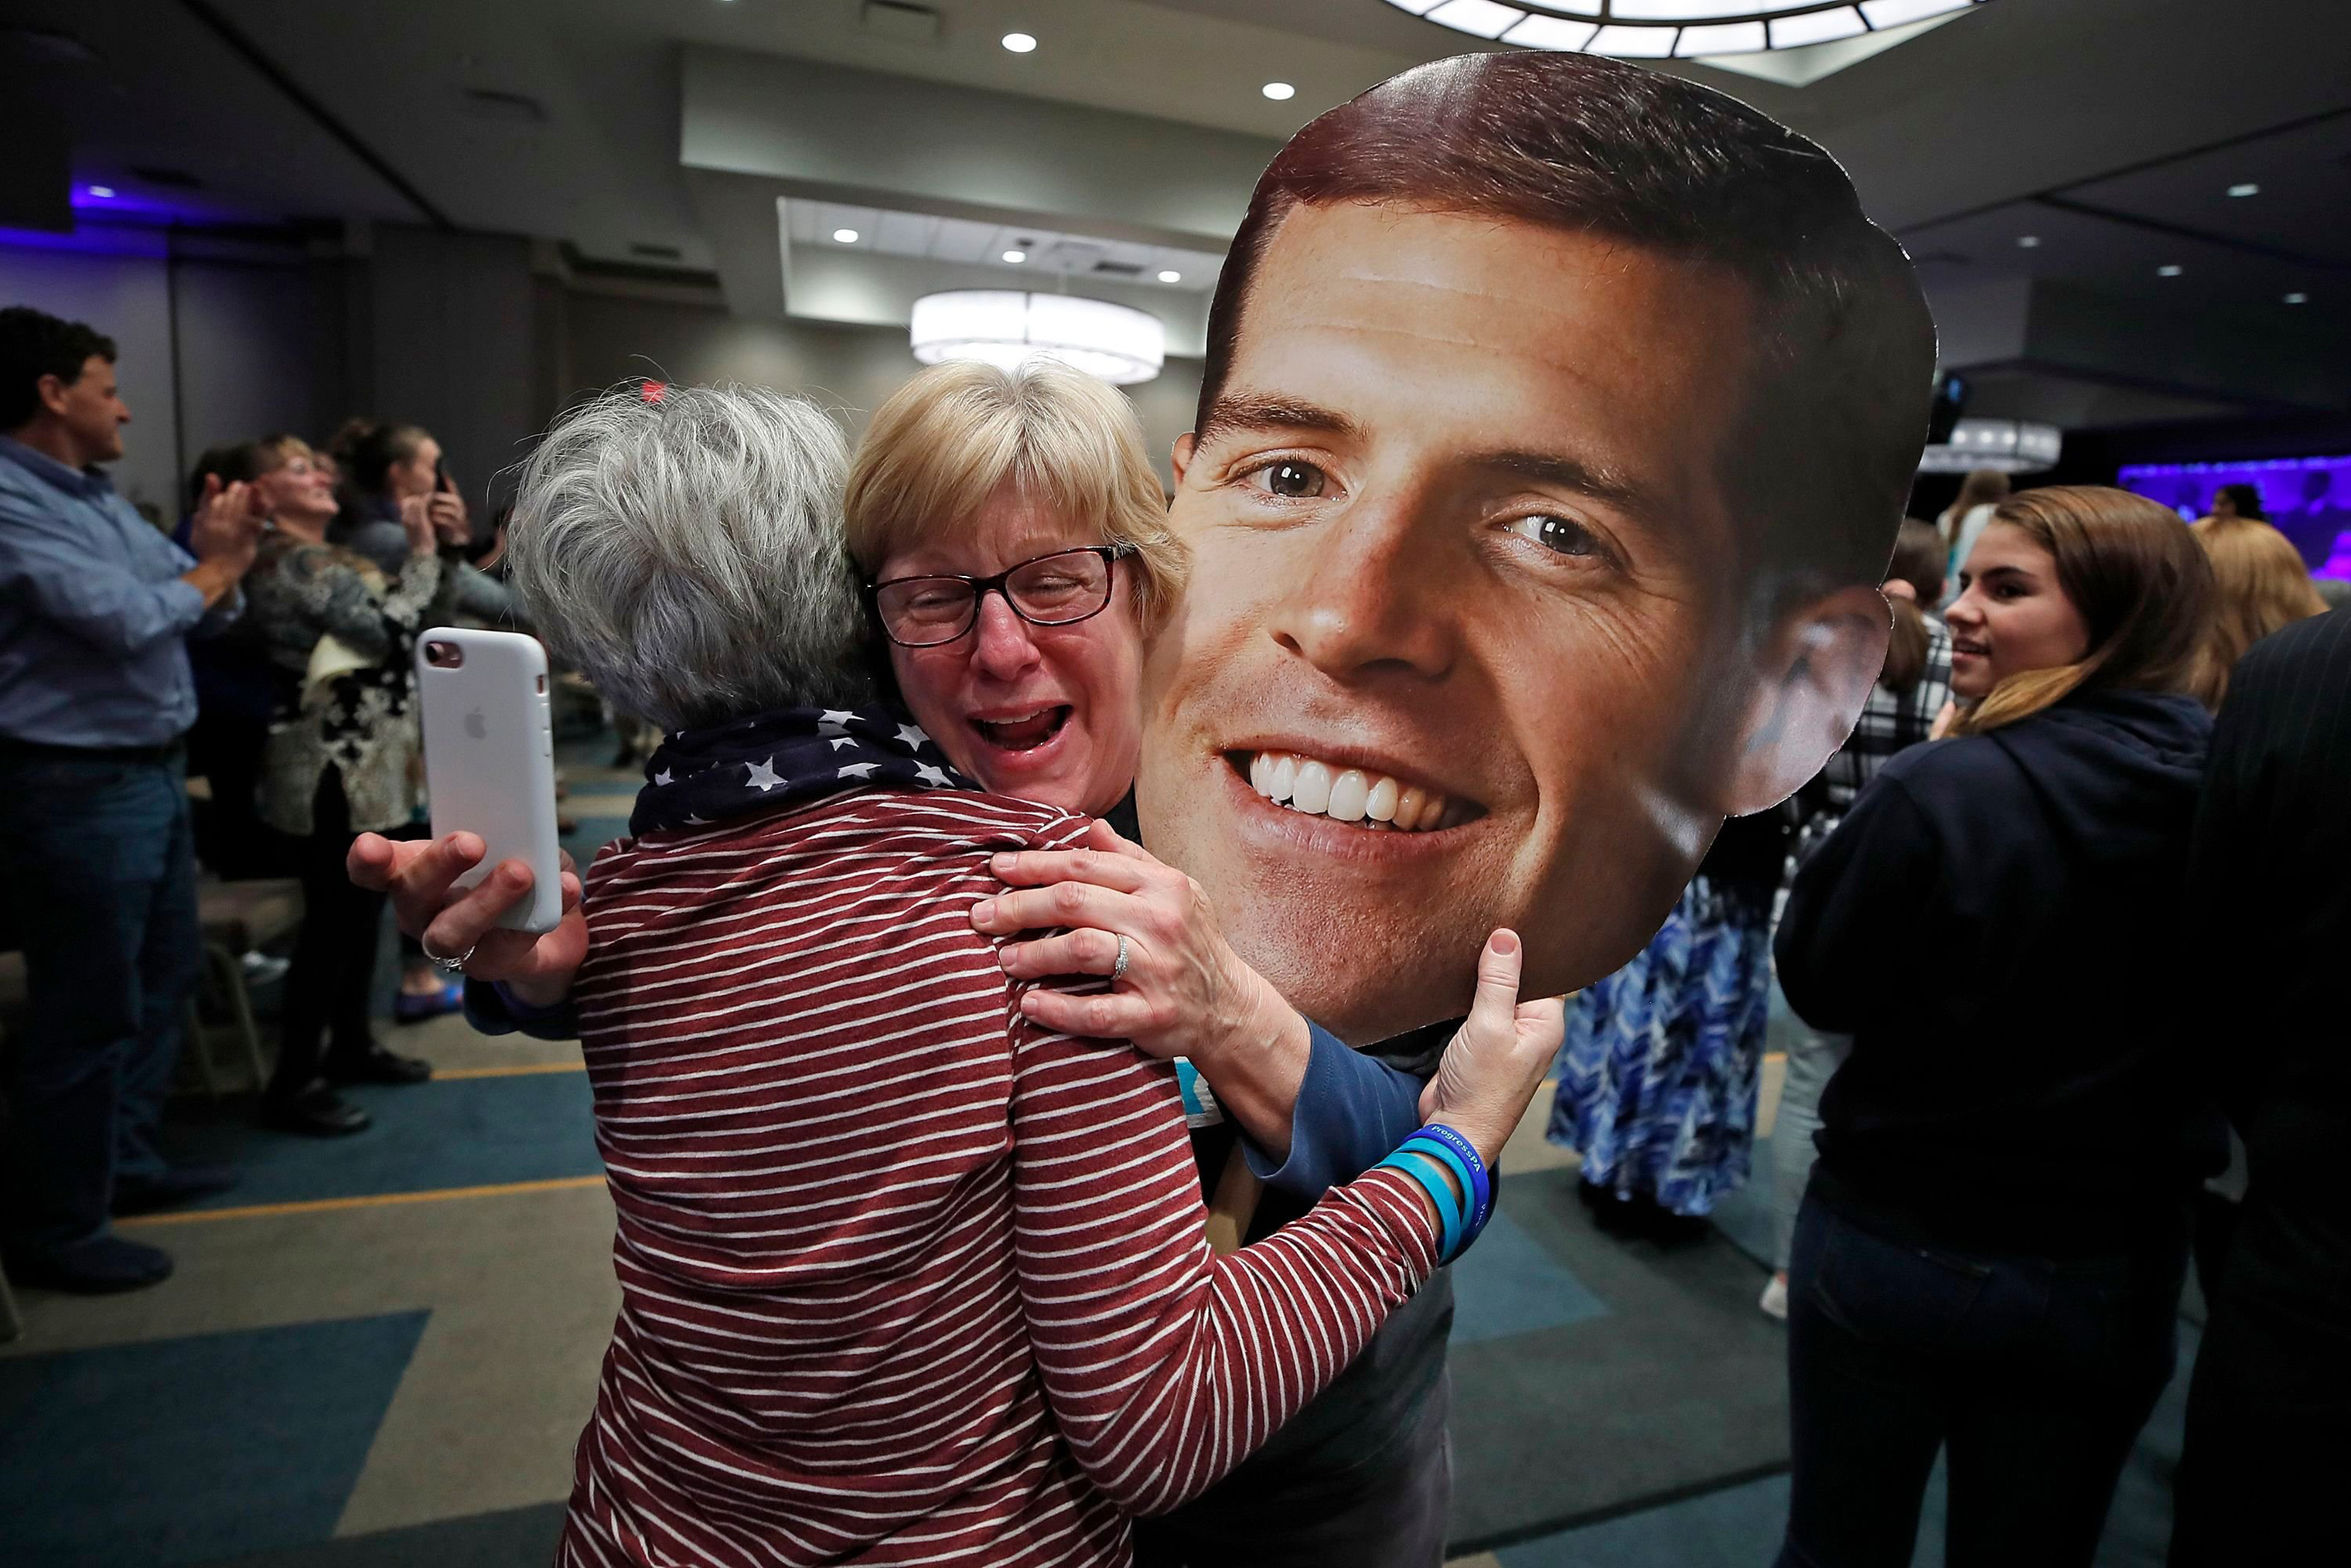 Supporters of Rep. Conor Lamb, Joanie Foran, left, and Linda Bishop, begin to celebrate after hearing CNN projected Lamb the winner in Pennsylvania's 17th Congressional District, at his election night party in Cranberry, Pa. (Gene J. Puskar—AP/Shutterstock)